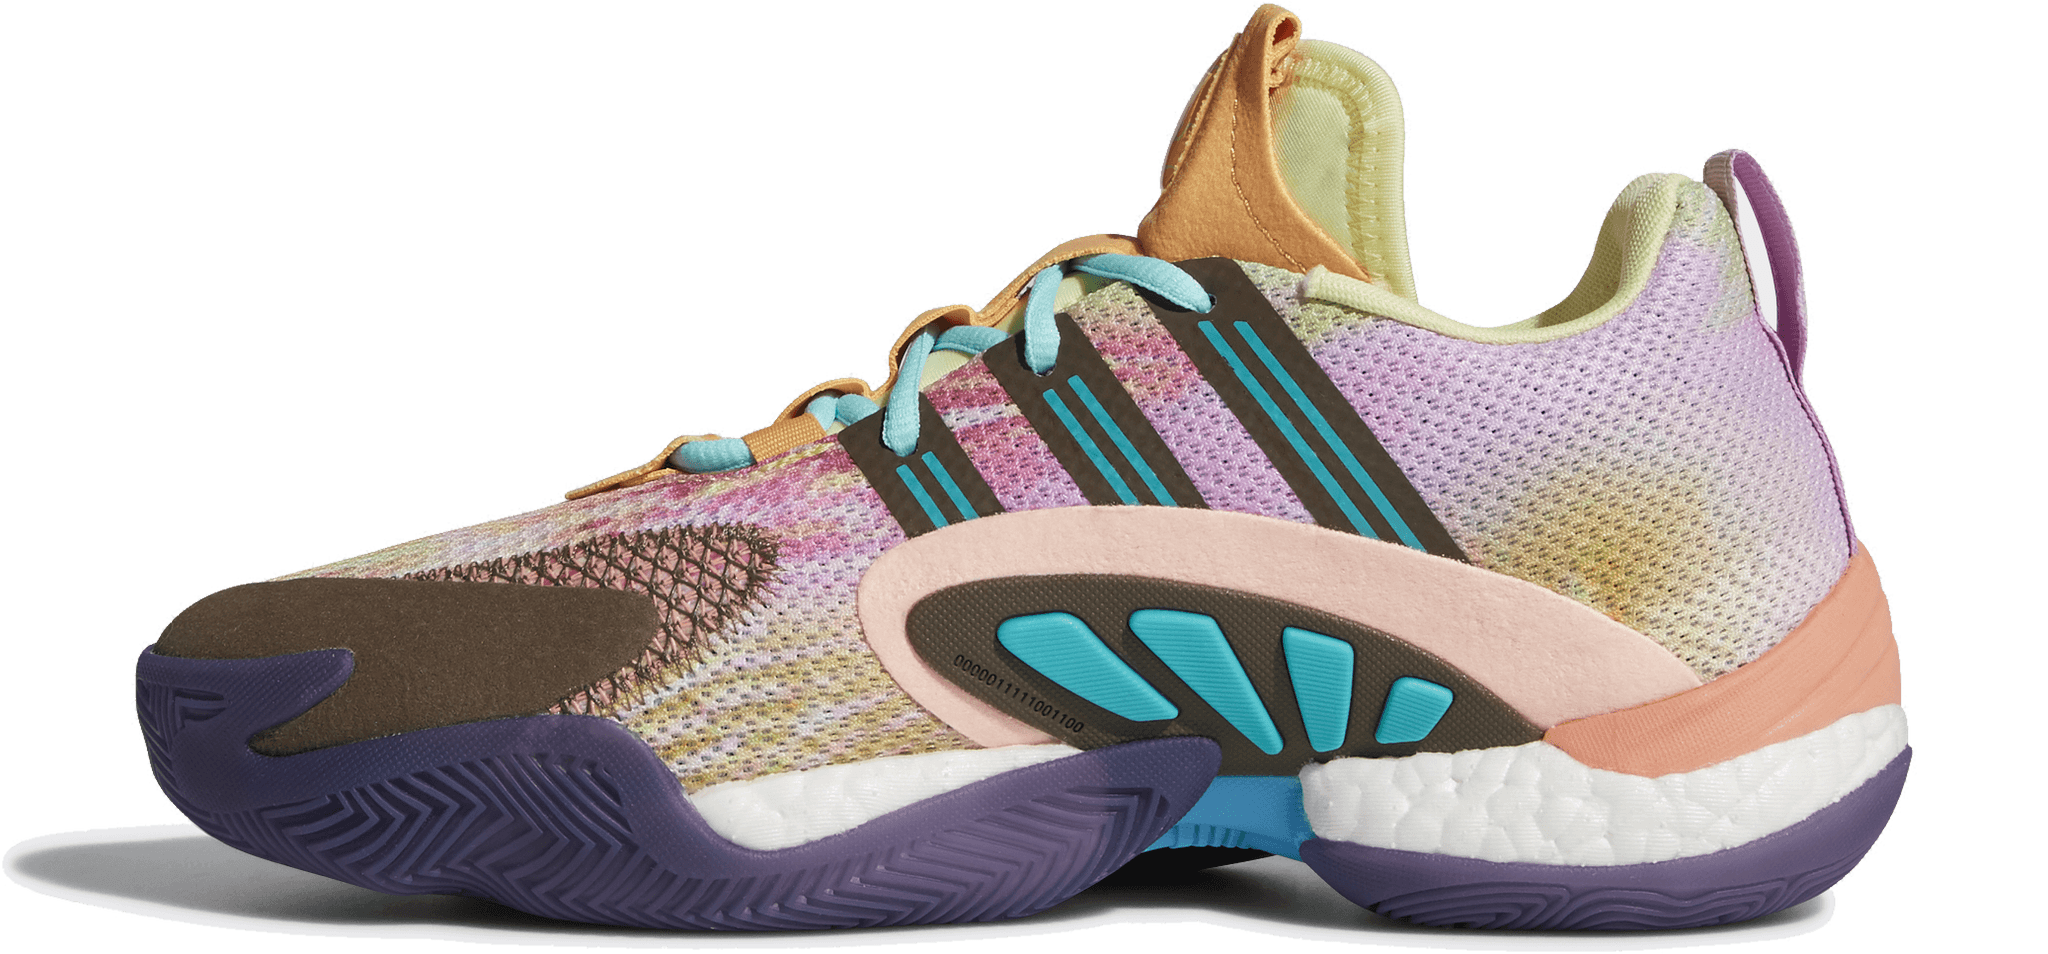 best adidas shoes for basketball